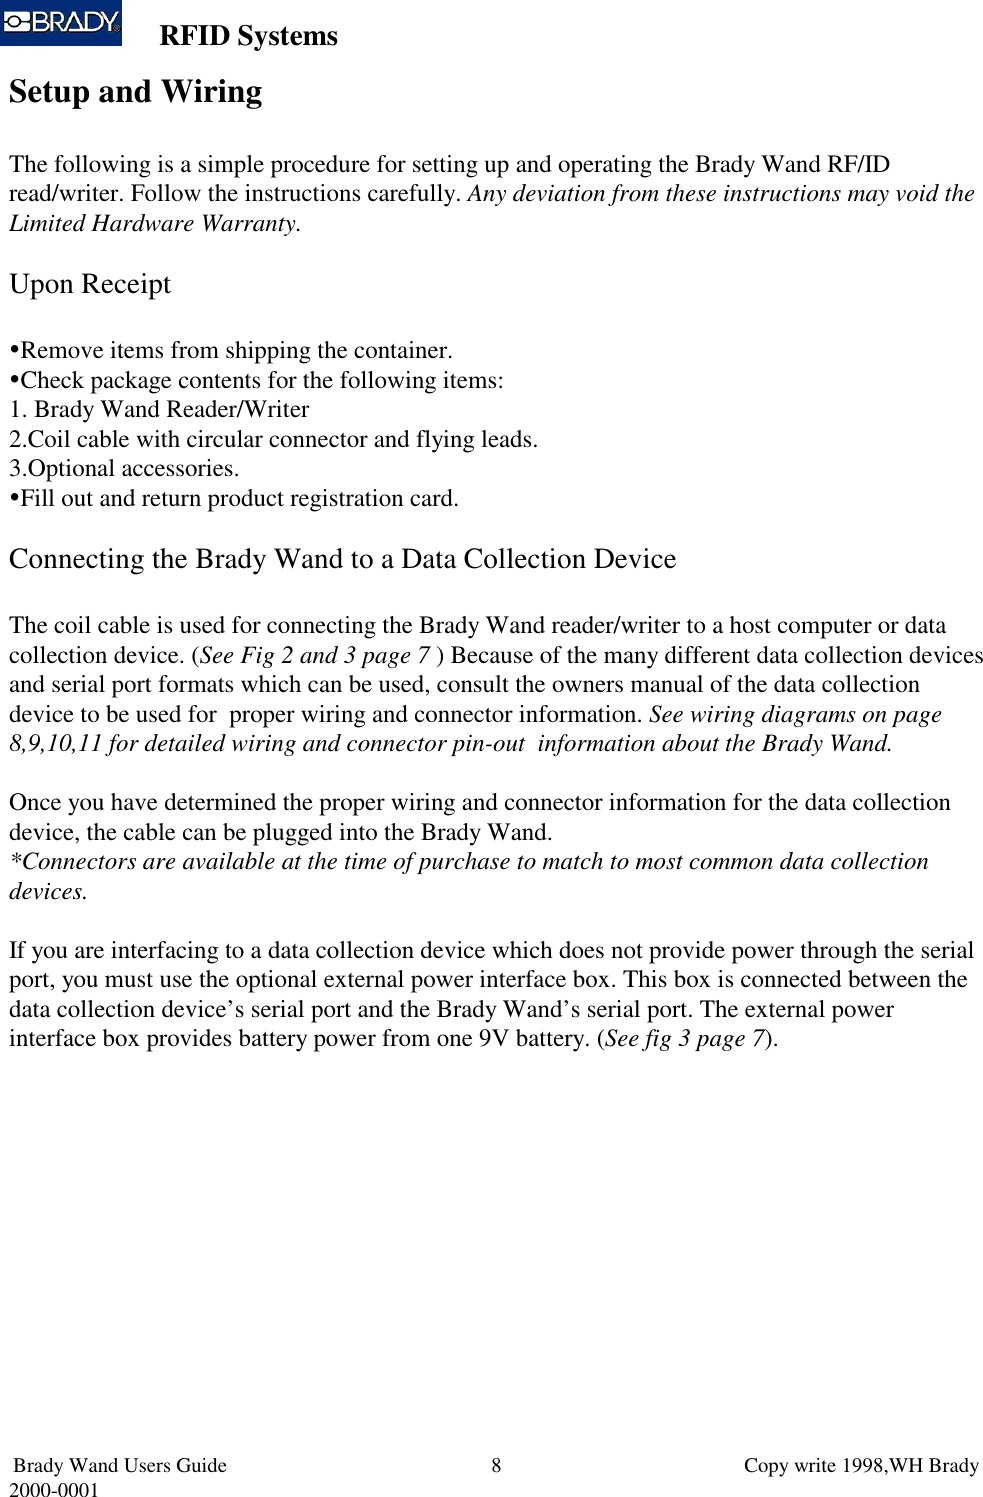 RFID SystemsBrady Wand Users Guide                           Copy write 1998,WH Brady2000-0001 8Setup and WiringThe following is a simple procedure for setting up and operating the Brady Wand RF/IDread/writer. Follow the instructions carefully. Any deviation from these instructions may void theLimited Hardware Warranty.Upon Receipt Remove items from shipping the container. Check package contents for the following items:1.  Brady Wand Reader/Writer2. Coil cable with circular connector and flying leads.3. Optional accessories. Fill out and return product registration card.Connecting the Brady Wand to a Data Collection DeviceThe coil cable is used for connecting the Brady Wand reader/writer to a host computer or datacollection device. (See Fig 2 and 3 page 7 ) Because of the many different data collection devicesand serial port formats which can be used, consult the owners manual of the data collectiondevice to be used for  proper wiring and connector information. See wiring diagrams on page8,9,10,11 for detailed wiring and connector pin-out  information about the Brady Wand.Once you have determined the proper wiring and connector information for the data collectiondevice, the cable can be plugged into the Brady Wand.*Connectors are available at the time of purchase to match to most common data collectiondevices.If you are interfacing to a data collection device which does not provide power through the serialport, you must use the optional external power interface box. This box is connected between thedata collection device’s serial port and the Brady Wand’s serial port. The external powerinterface box provides battery power from one 9V battery. (See fig 3 page 7).